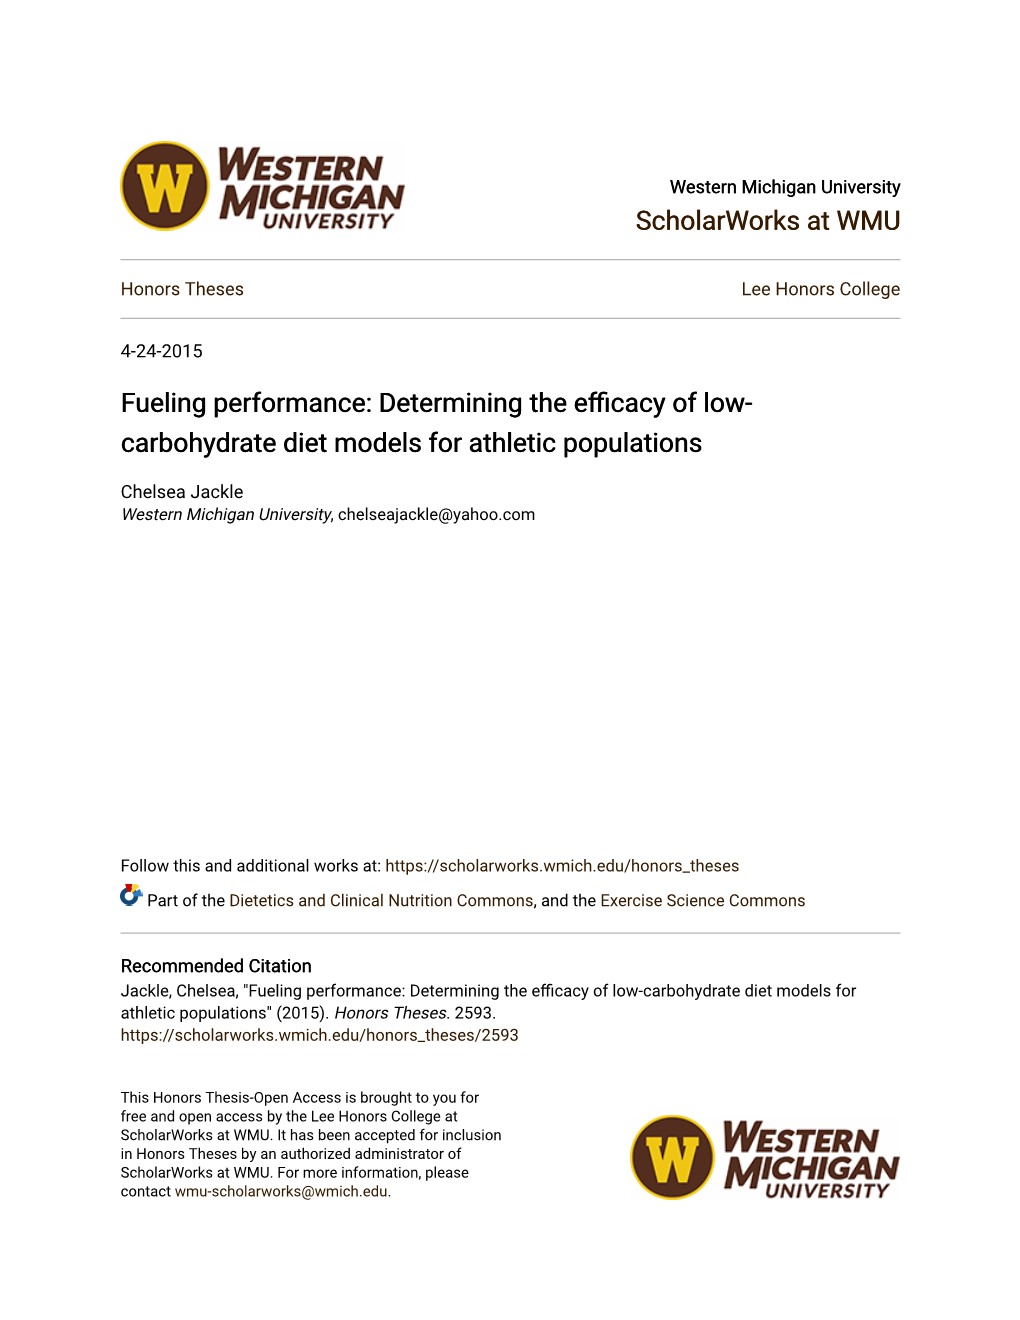 Fueling Performance: Determining the Efficacy of Low-Carbohydrate Diet Models for Athletic Populations" (2015)